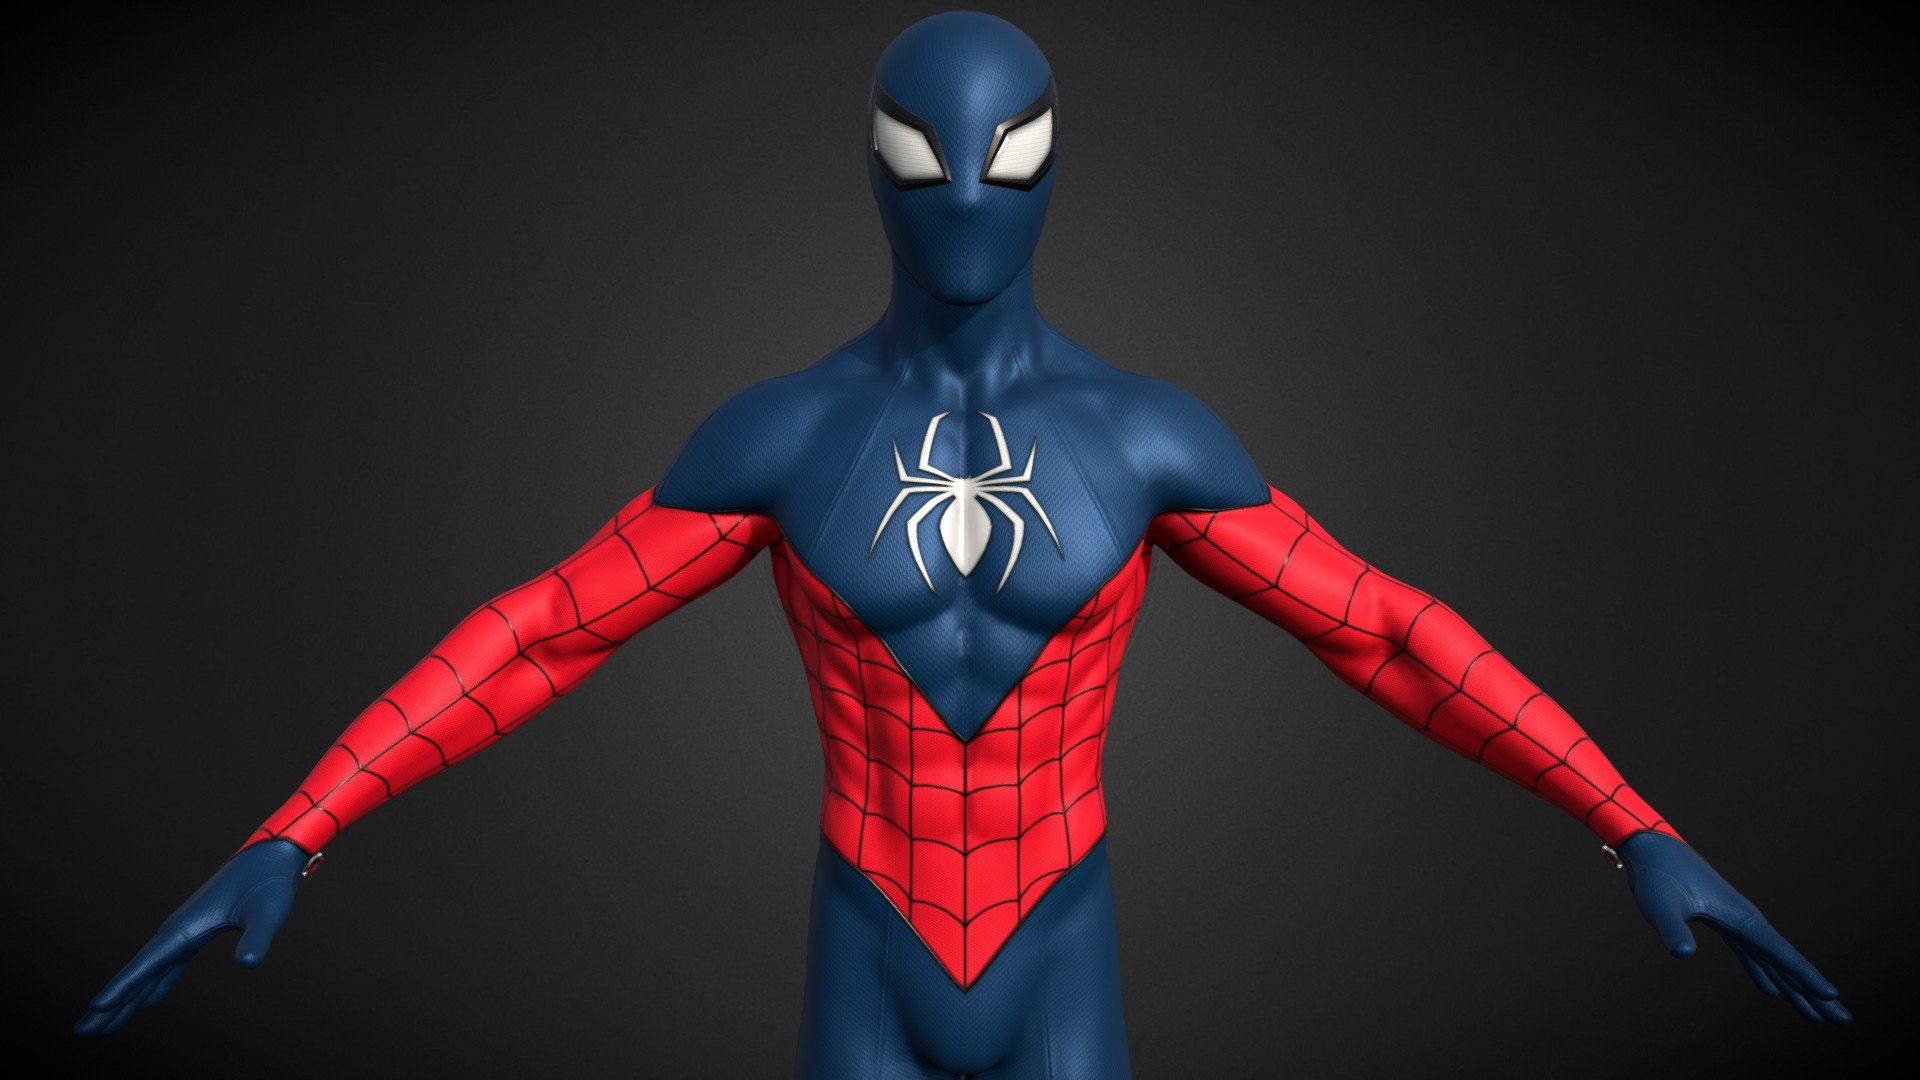 Spiderman comic books character published by Marvel Comics.




Model was made on Maya, Zbrush, substance painter and Blender . 

This model is inspired from one of the spiderman in Spiderman across the spider-verse movie 

The model has a  Spider-man suirt

High quality texture work.

The model come with complete 4k textures and BlENDER, FBX, MTL And OBJ file formats 

The model has 1 materials contains 5 maps Basecolor, Roughness,Metalness, Normal, and Ao

All textures and materials are included and mapped. (4k resoulutions)

No special plugin needed to open scene

The model can be rigg easily
 - SPIDER-MAN - Buy Royalty Free 3D model by AFSHAN ALI (@Aliflex) 3d model